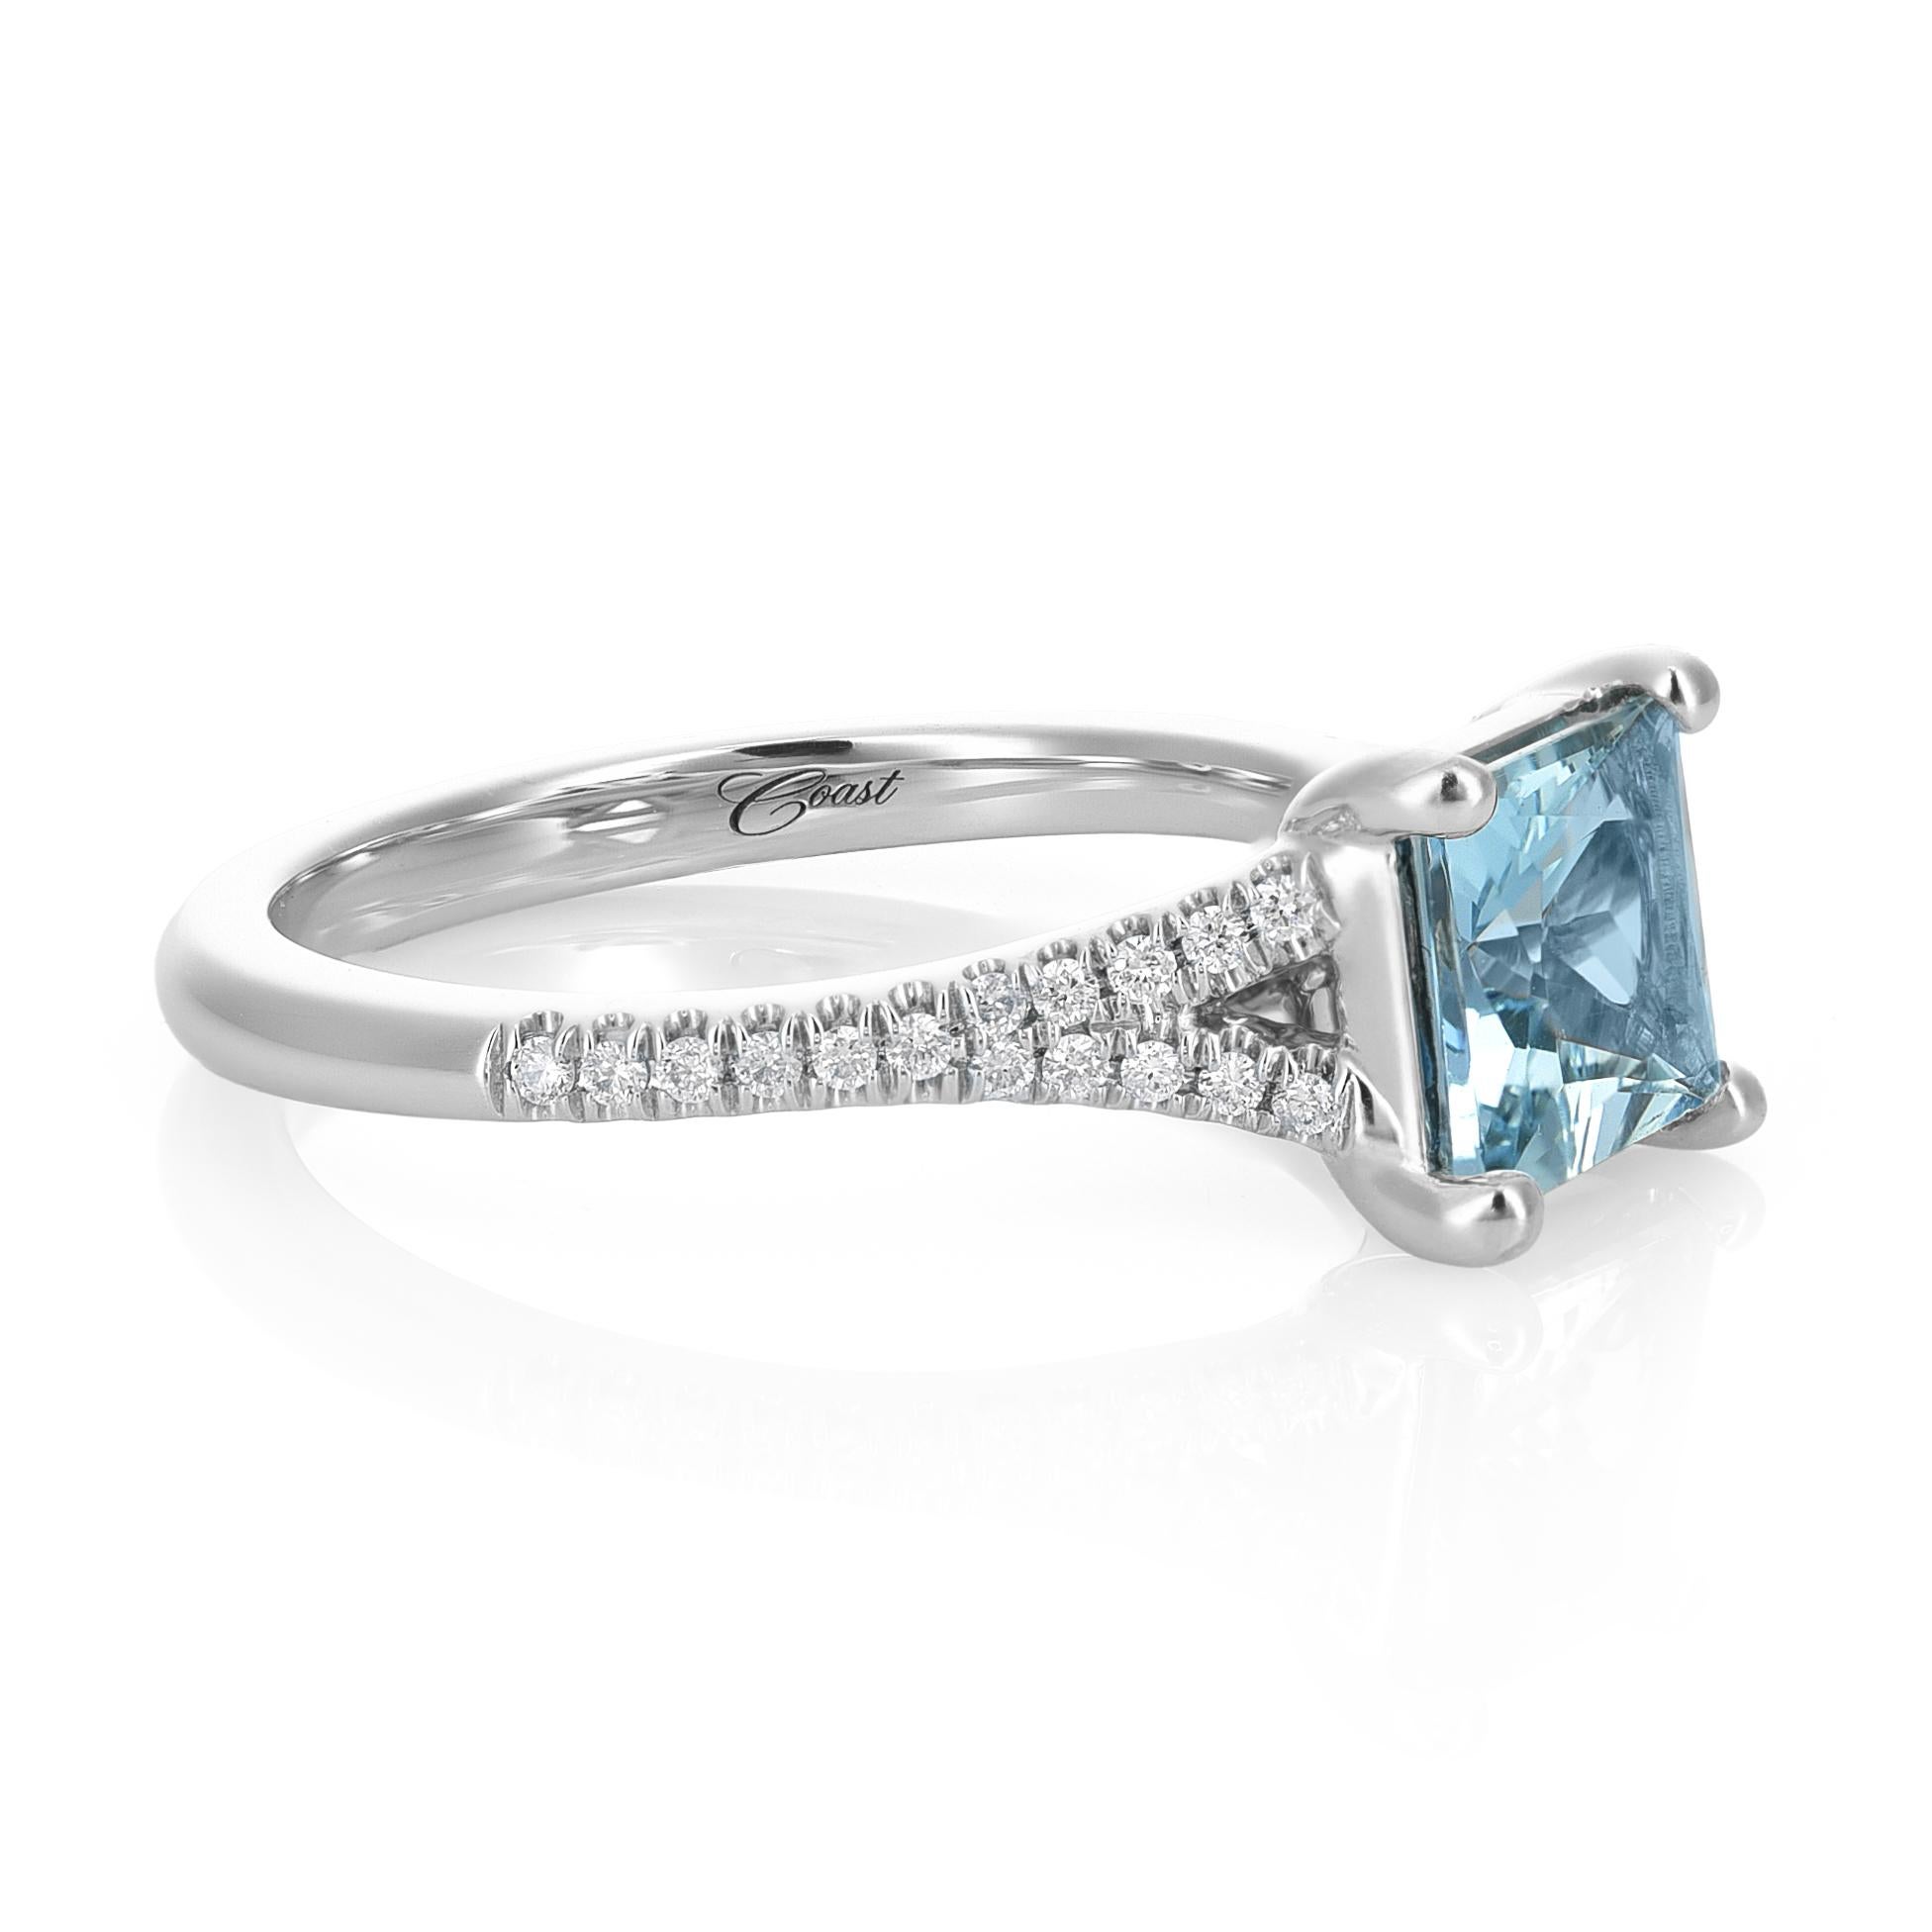 Introducing a captivating piece: a 14KW Gold Ring featuring a splendid Natural Aquamarine weighing 1.47 carats. The Princess cut of the Aquamarine, enhanced by gentle heating, creates a mesmerizing display of elegance. Adding to its allure are 0.14